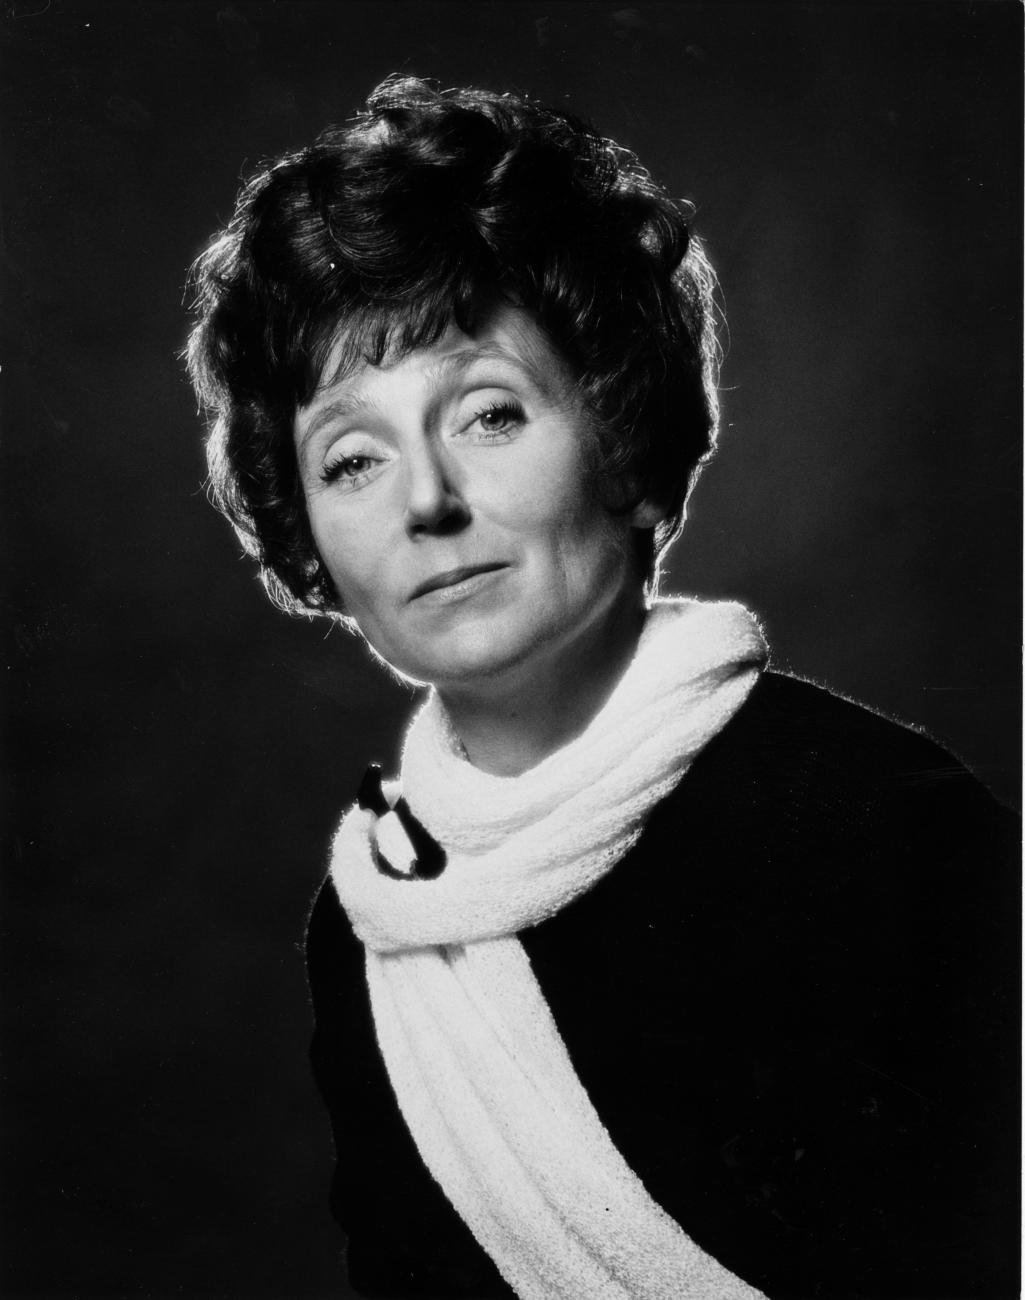 Ludmilla Chiriaeff posed in black and white photo wearing a white scarf.